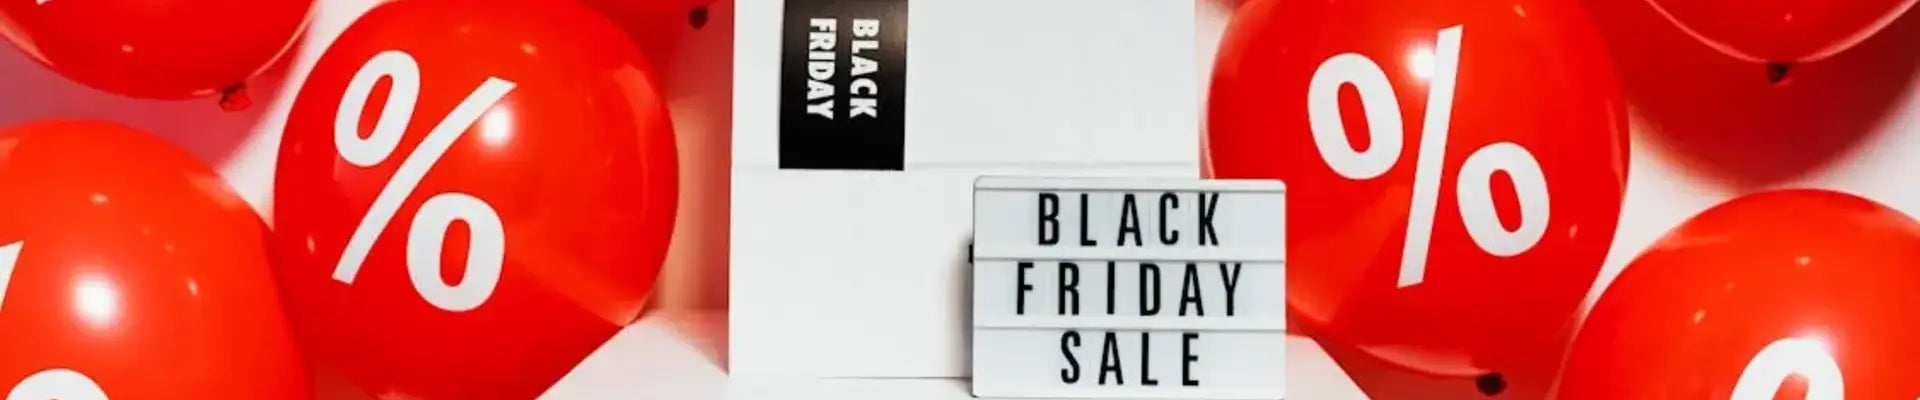 Unwrapping Success: The Art of Packaging on Black Friday